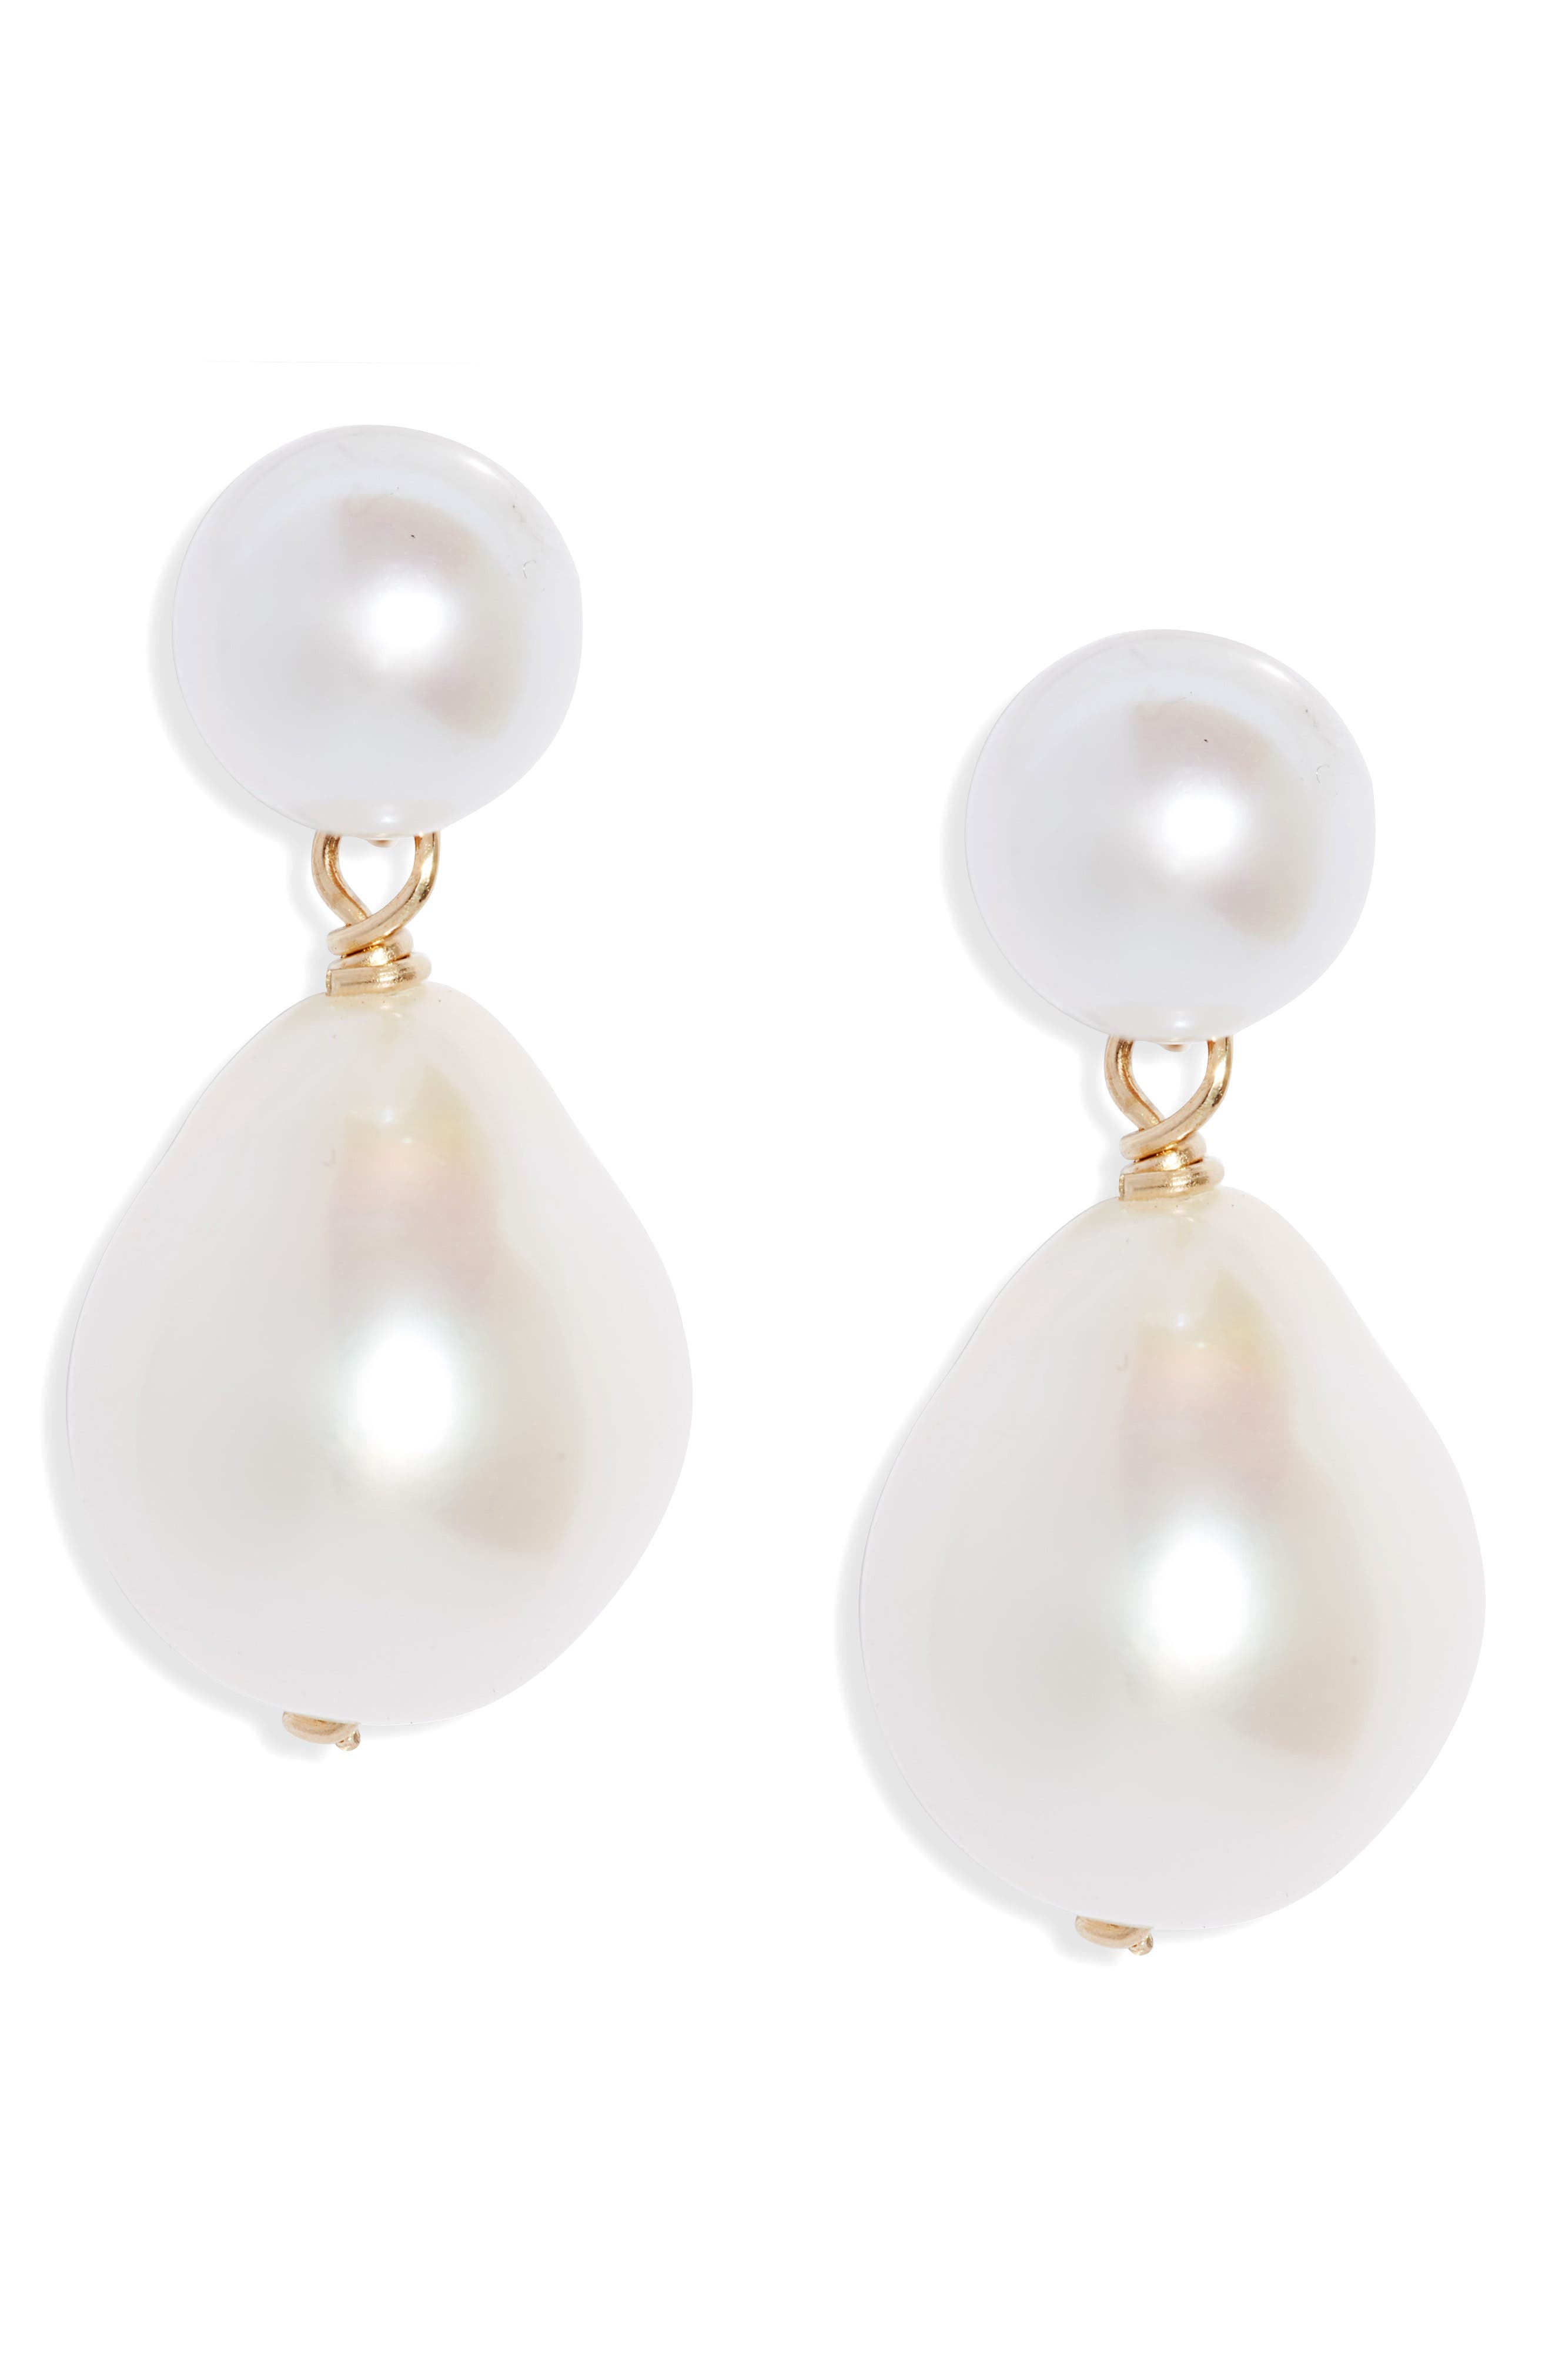 fashion vintage pearl earrings 14K gold filled pearl ear hooks 4mm pearl earrings 9mm pearl earrings